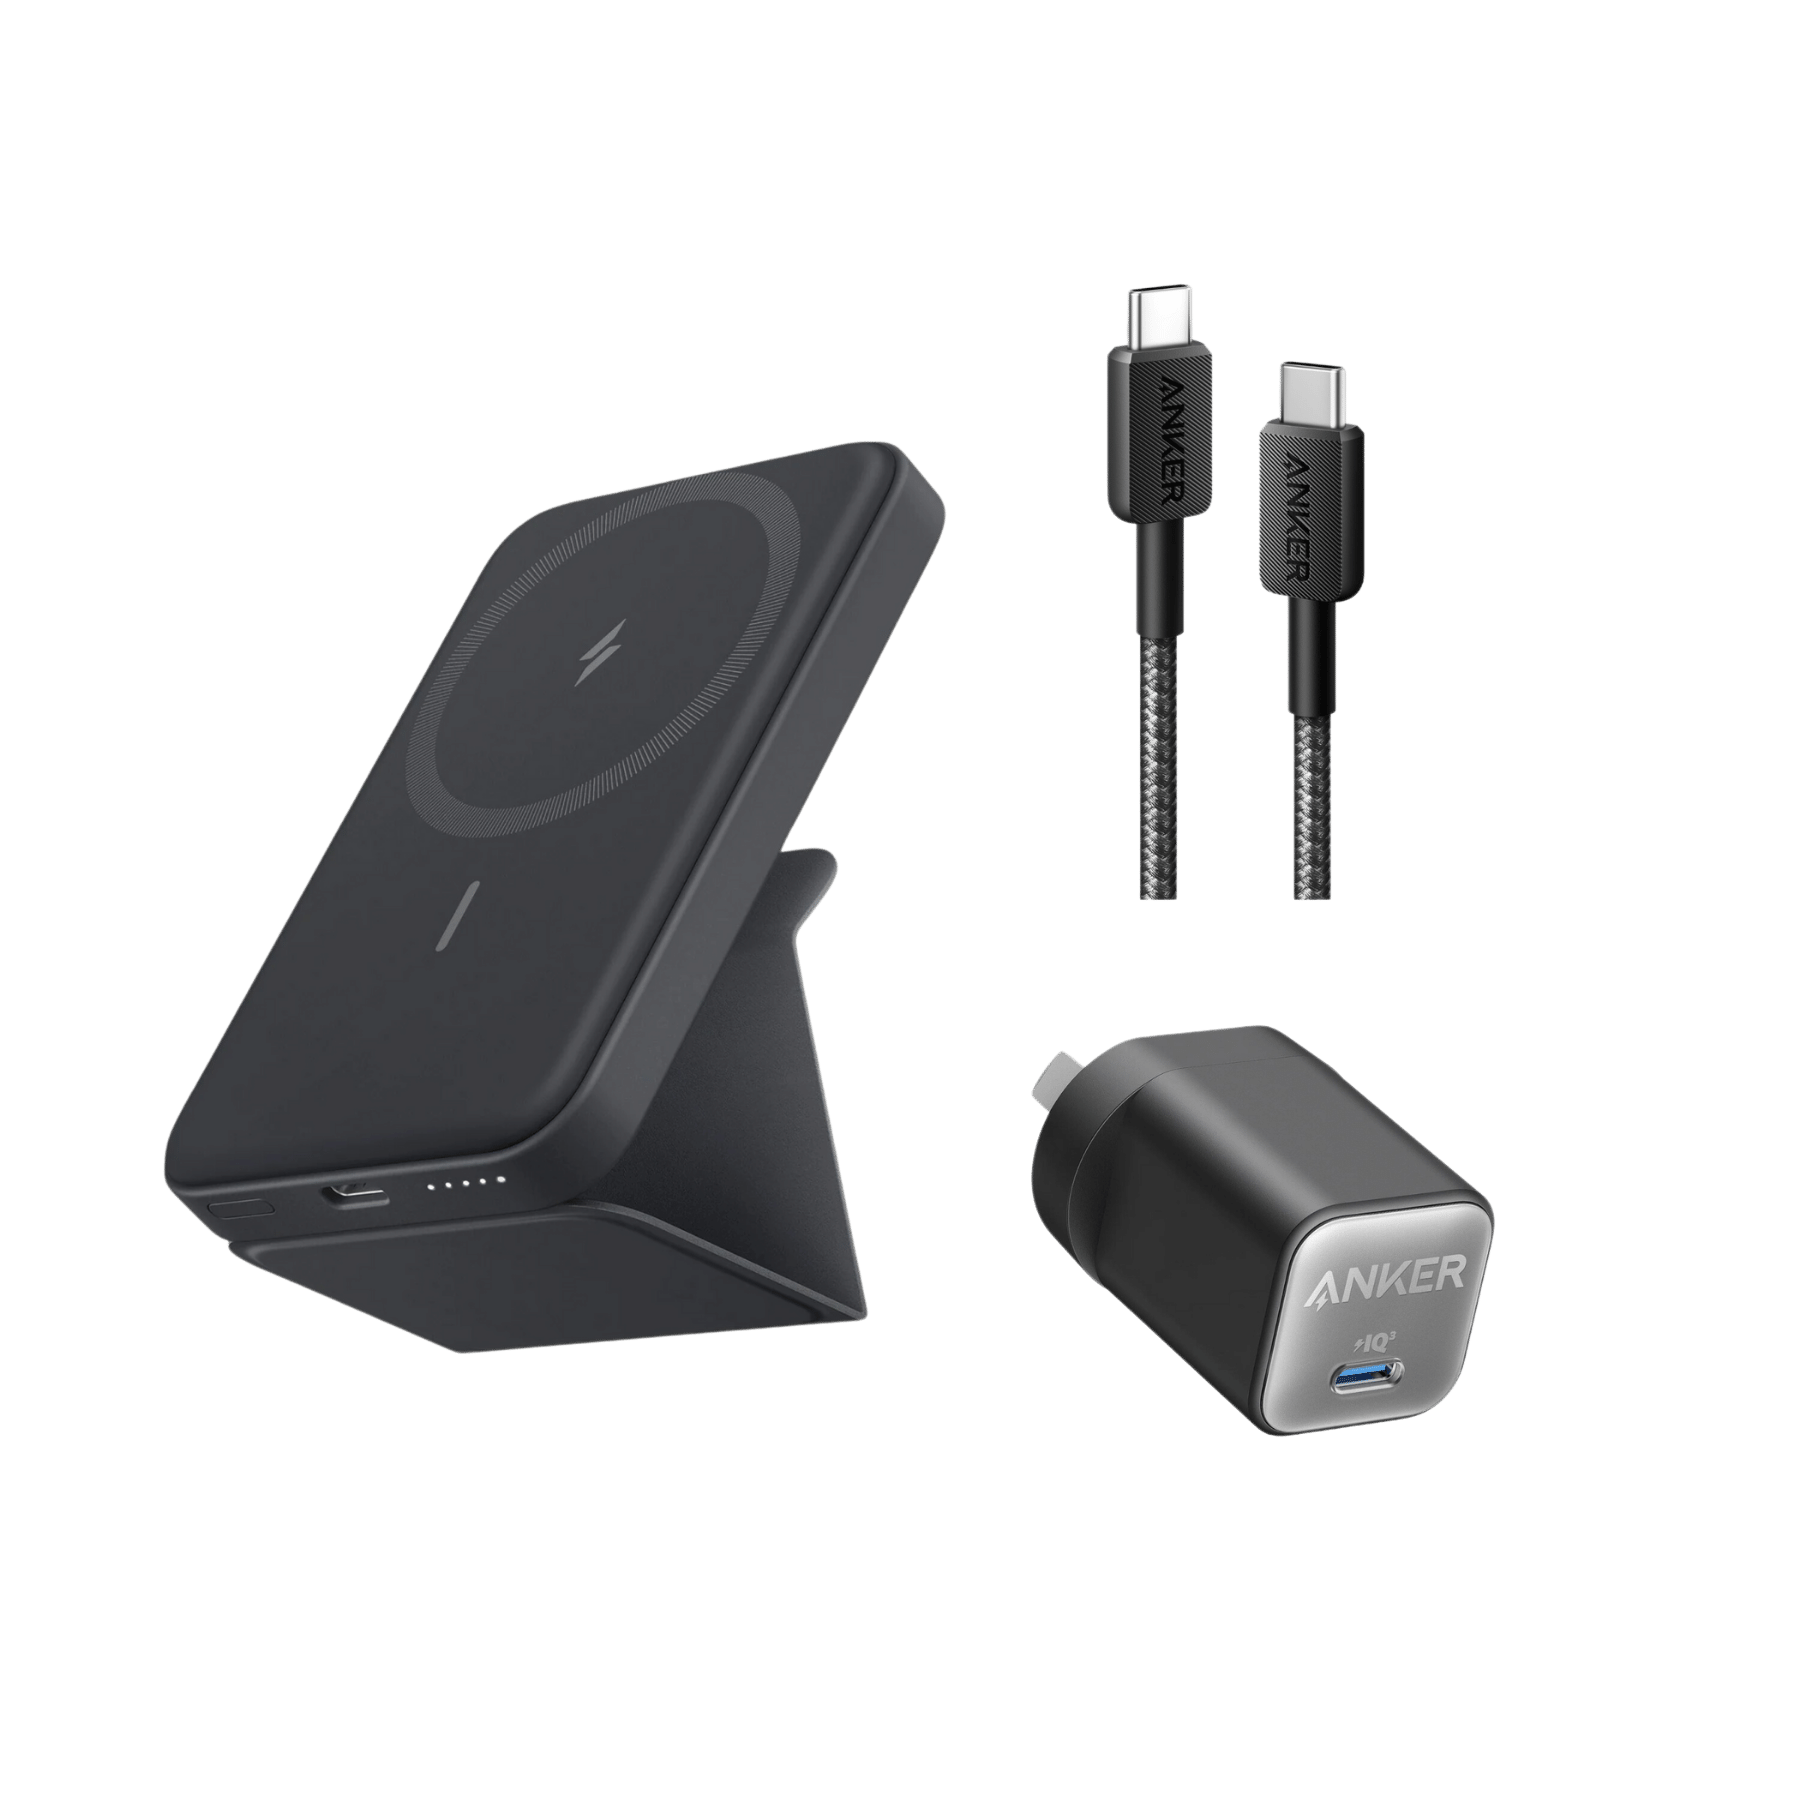 Anker <b>622</b> Magnetic Battery and <b>511</b> Charger (Nano 3, 30W) and <b>322</b> USB-C to USB-C Cable